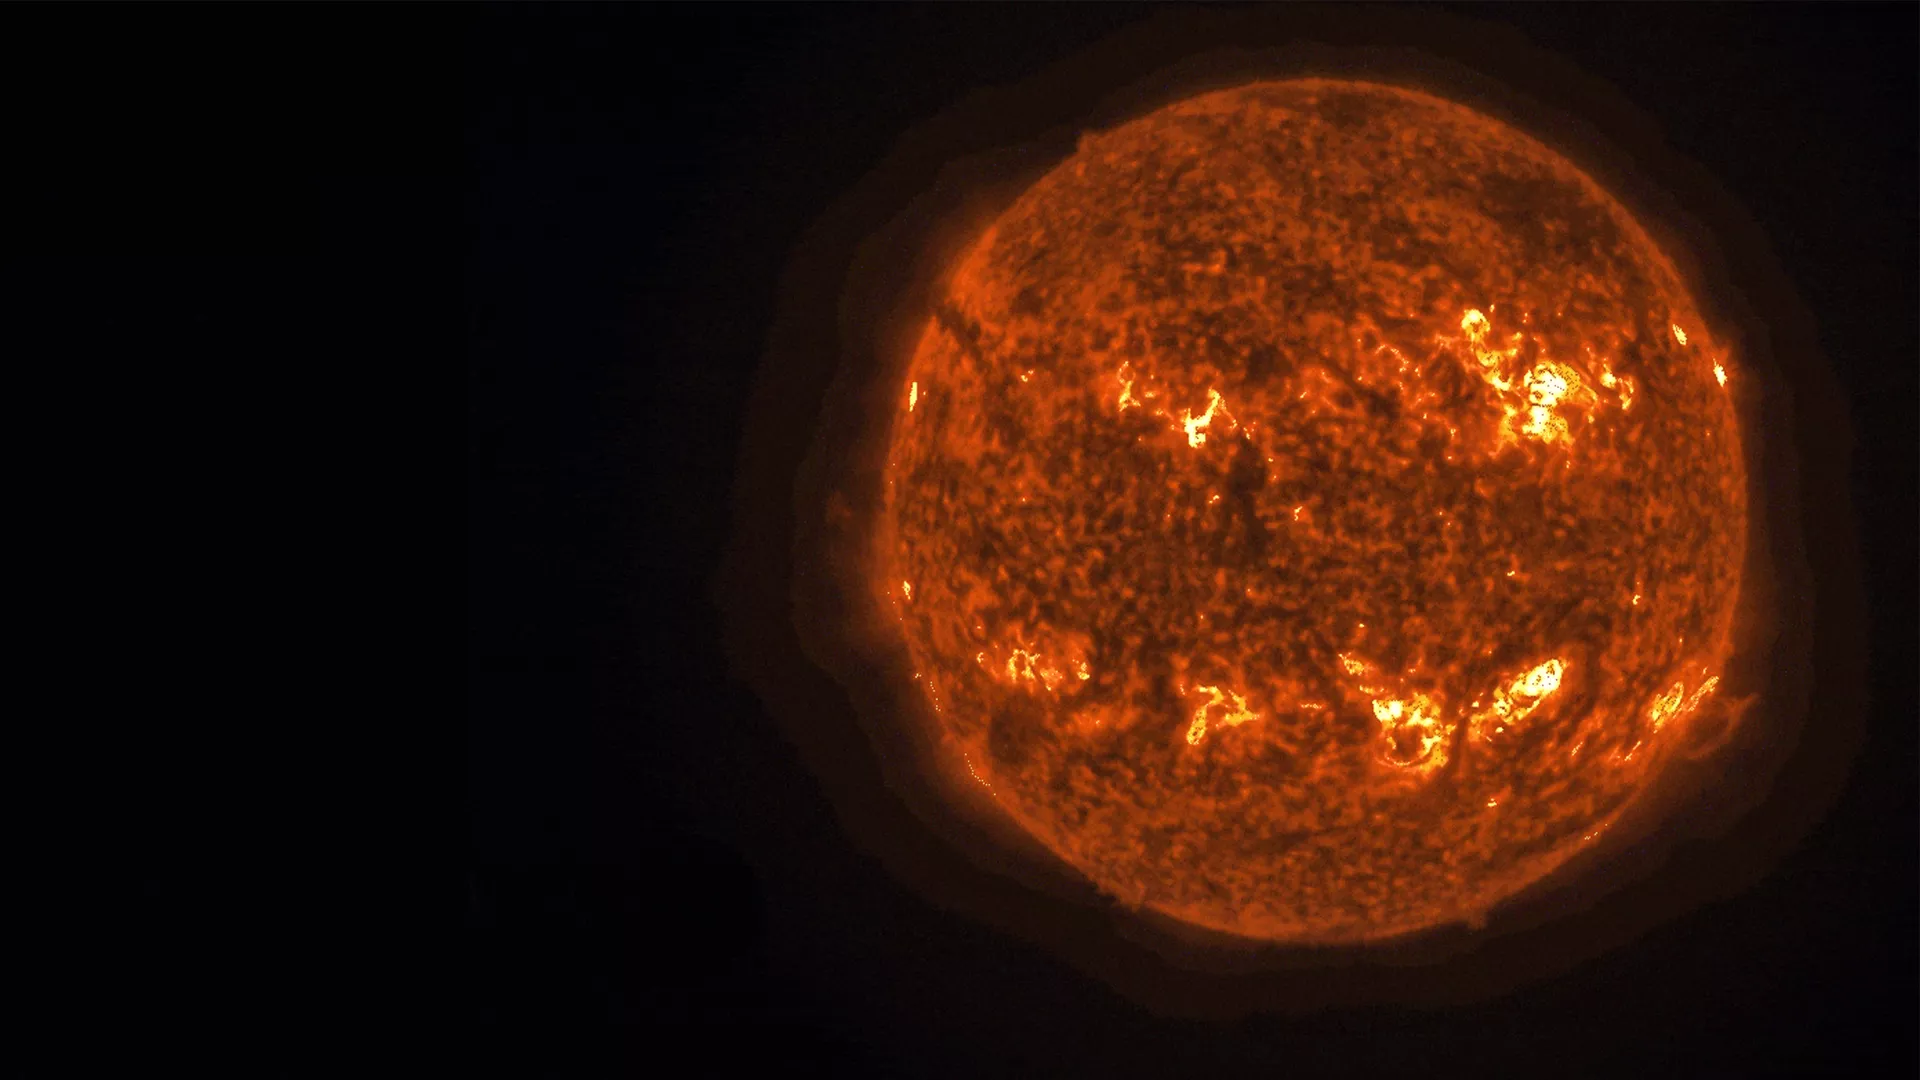 Image of the sun using the CCOR instrument. 